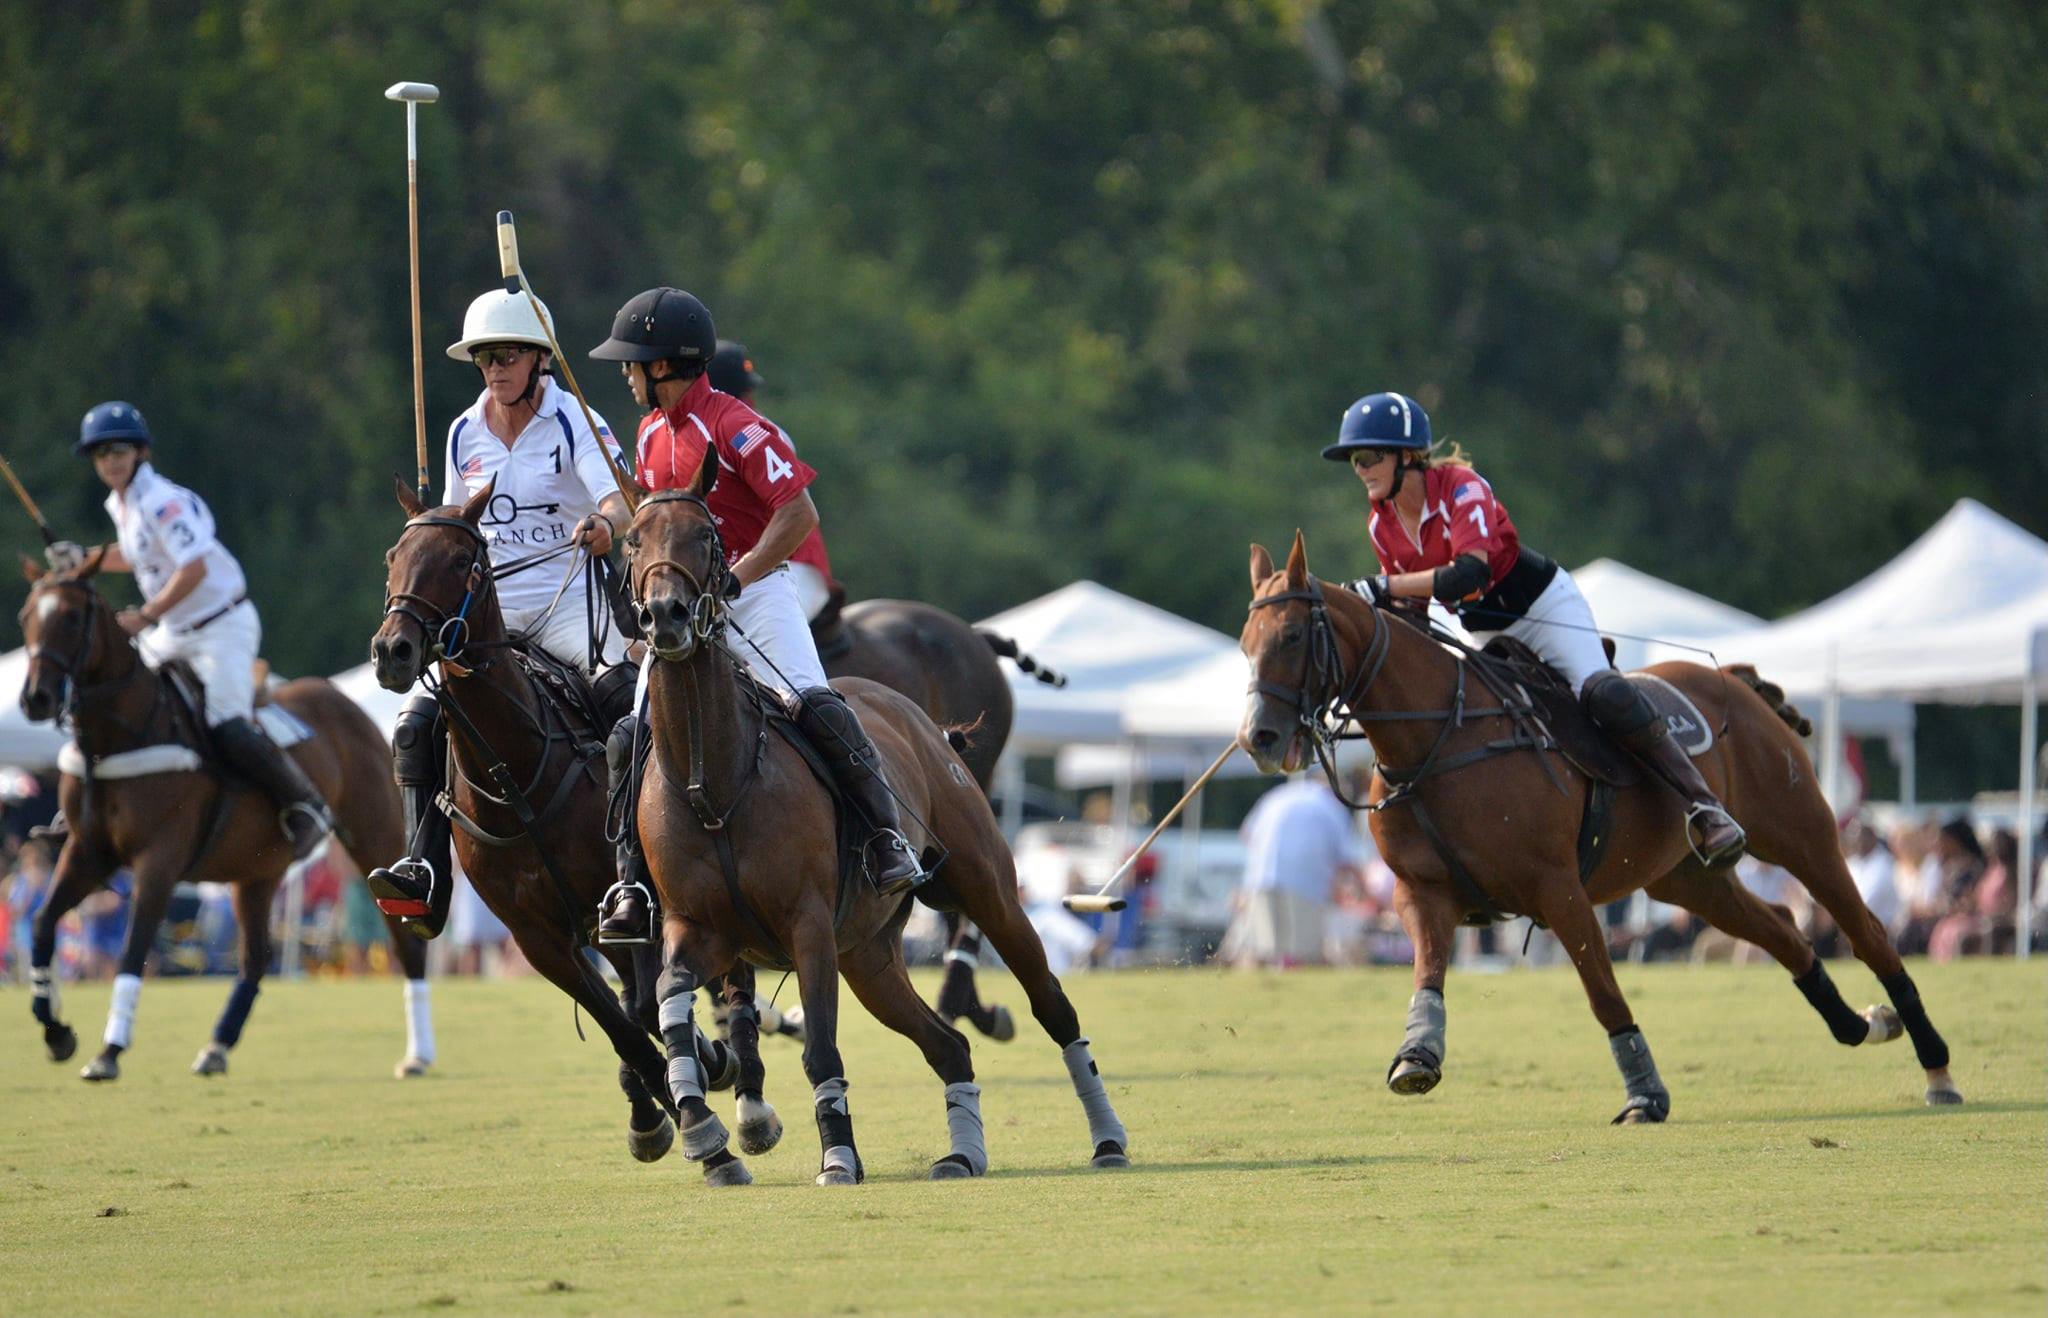 Teams rally for the ball - Chukkers for Charity Event Franklin, TN.